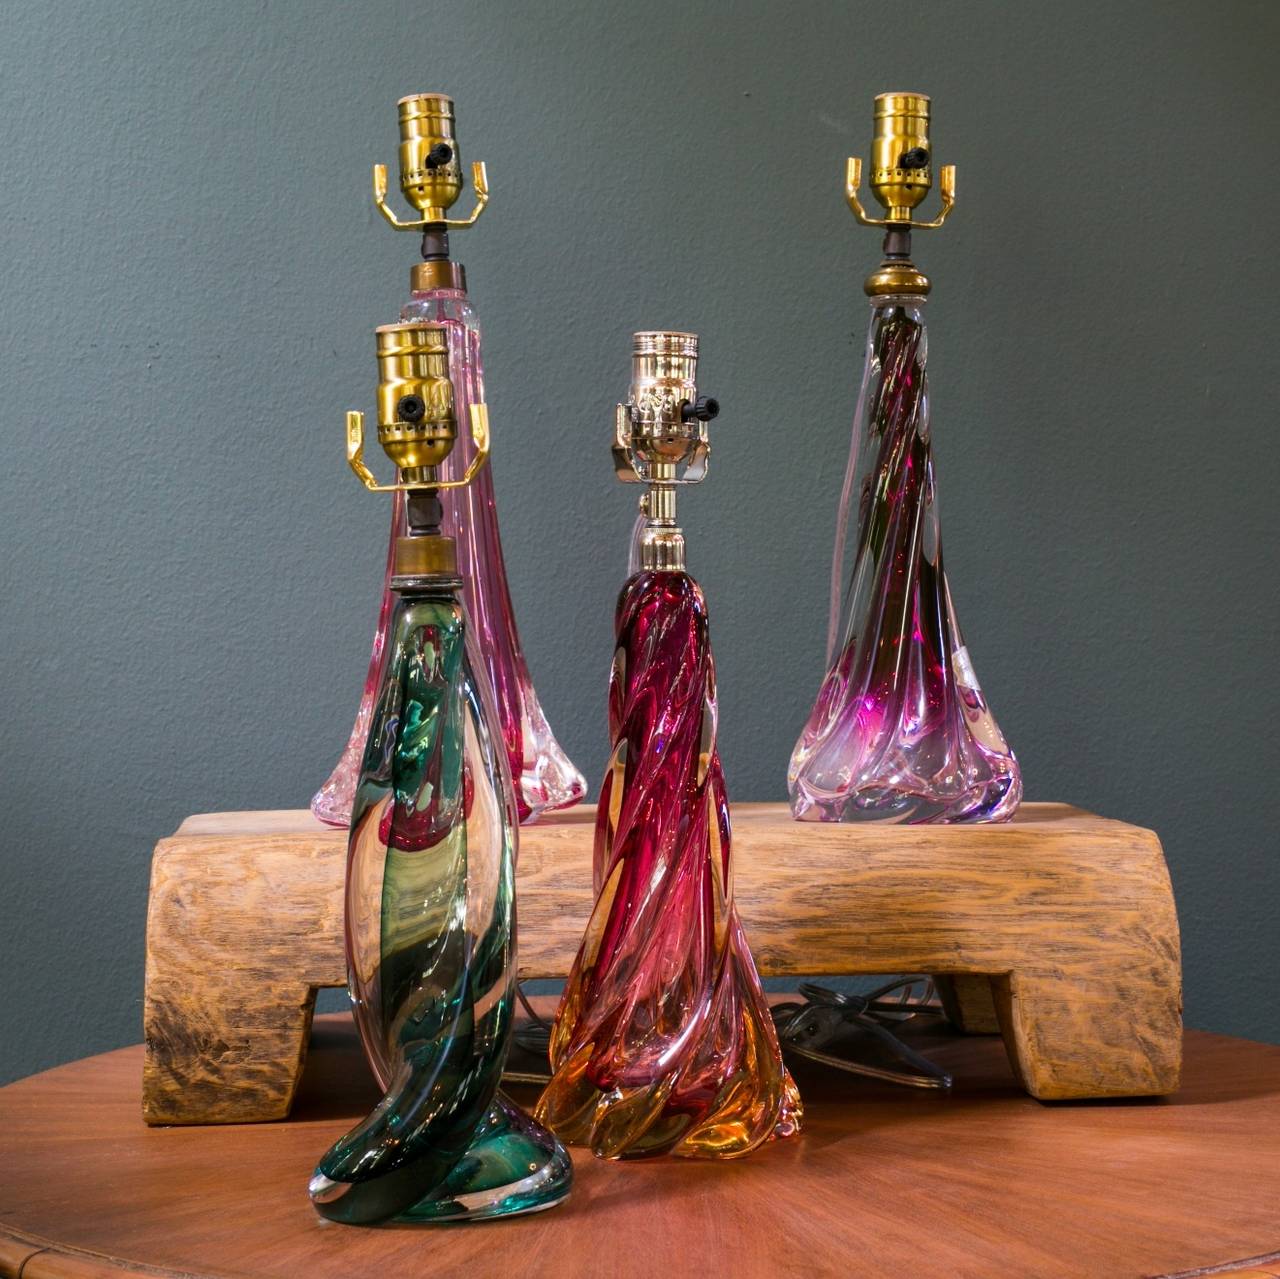 Authentic Val St. Lambert hand-blown glass lamps from Belgium, circa 1960. Beautiful array of colors and expert craftsmanship. Heavy crystal glass. Several of the lamps have the original sticker attached. Re-wired for the USA with UL-listed parts.